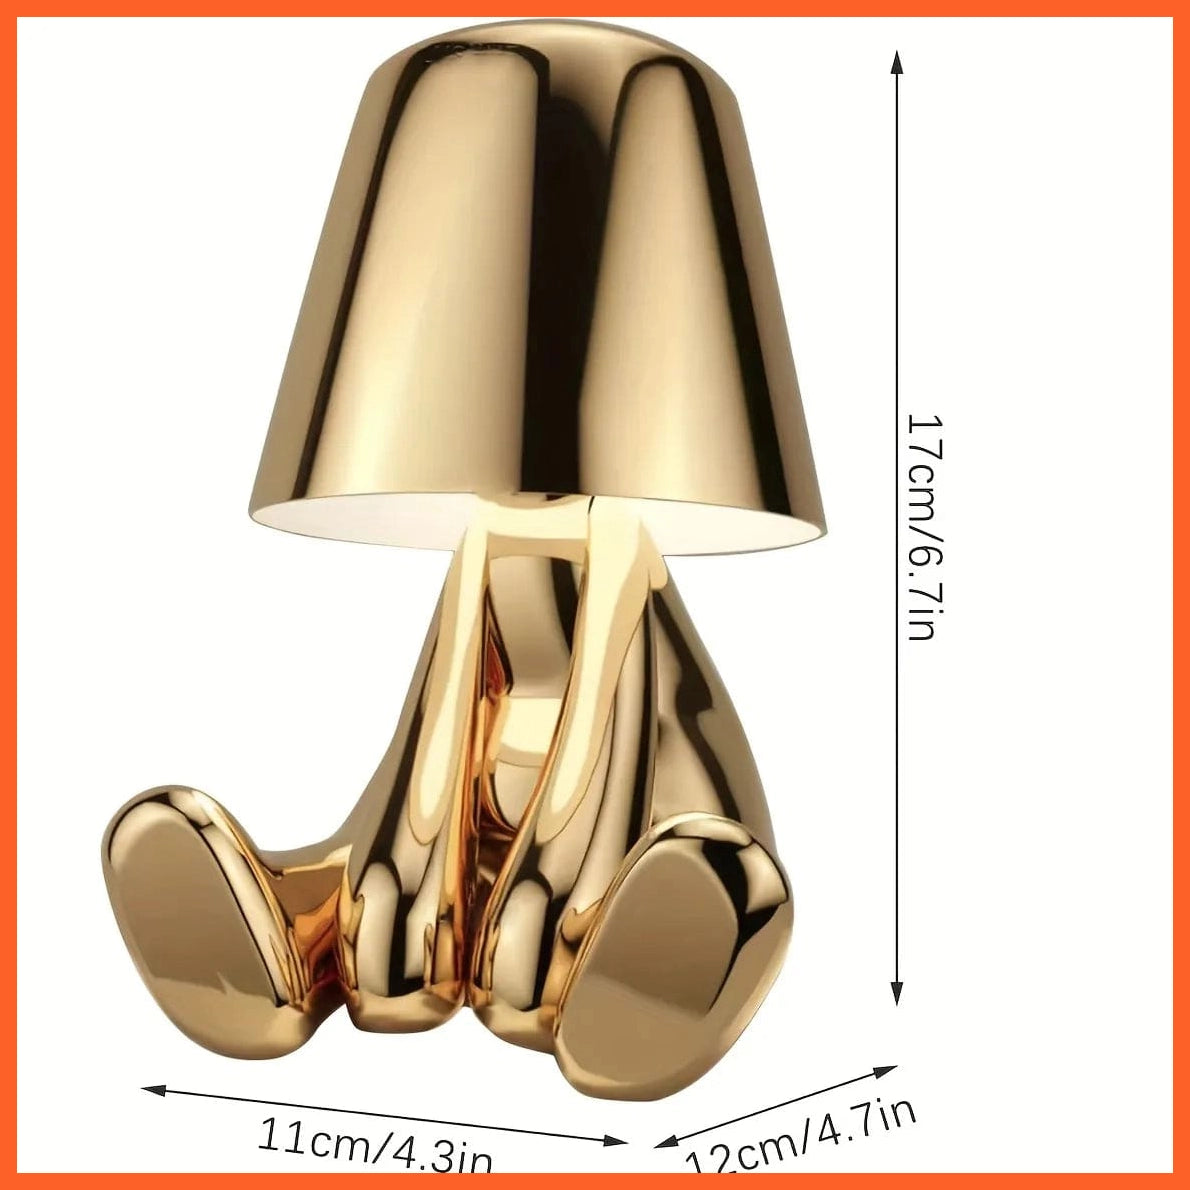 whatagift.com.au A Golden Color Thinker Statue LED Table Lamp With USB Port| Nightstand Lamp For Home, Living Room